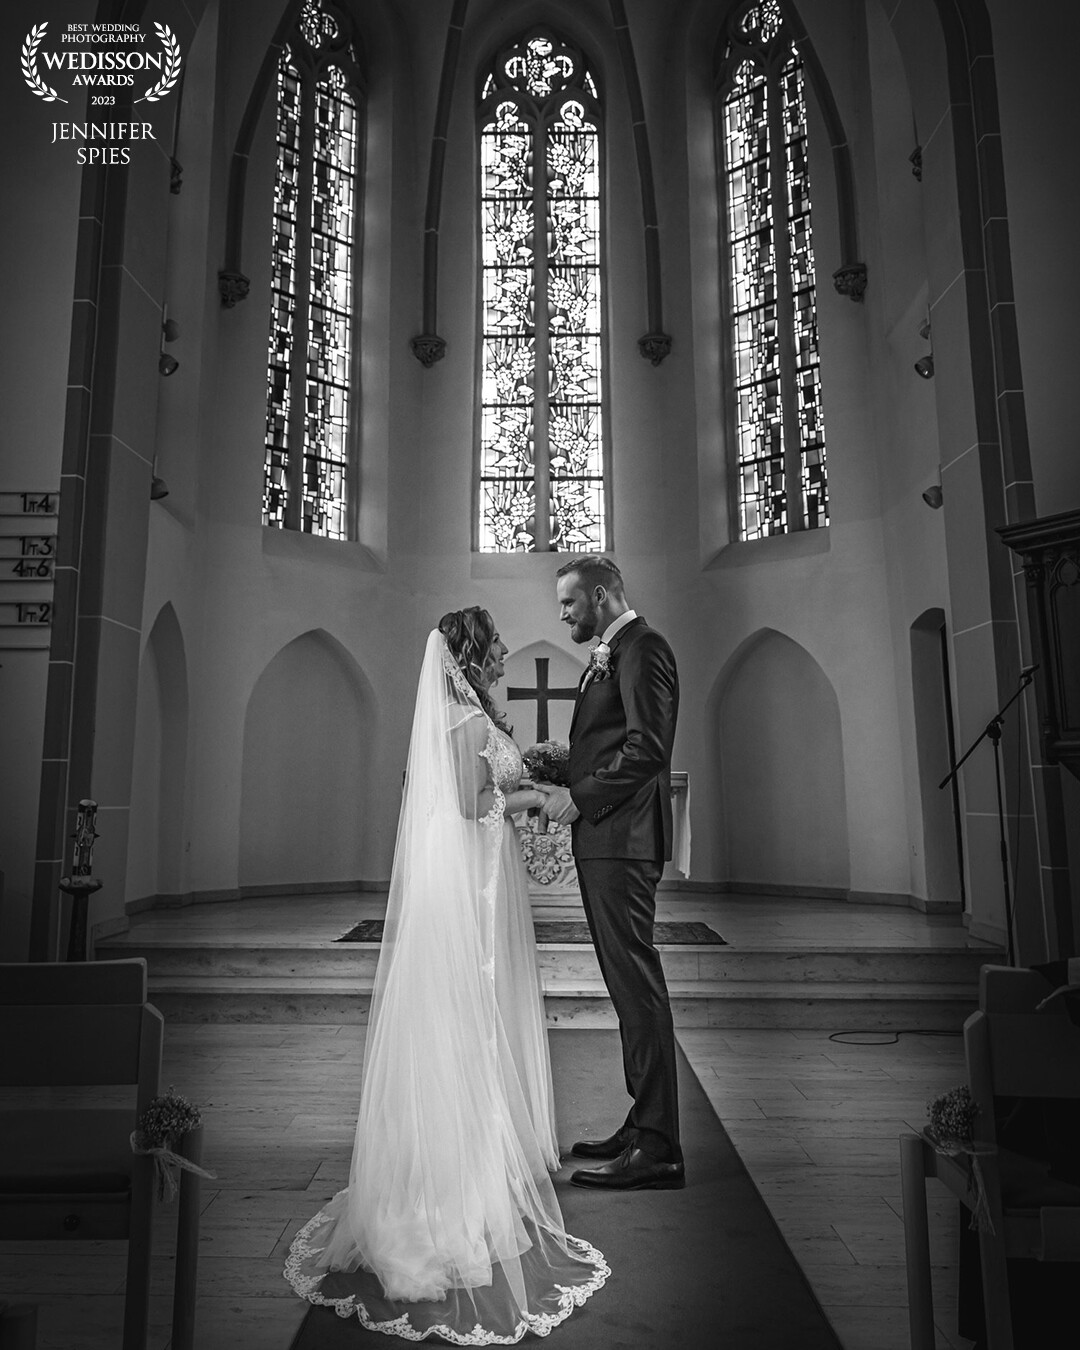 What an intimate moment between the bridal couple shortly after the wedding ceremony in this beautiful church.